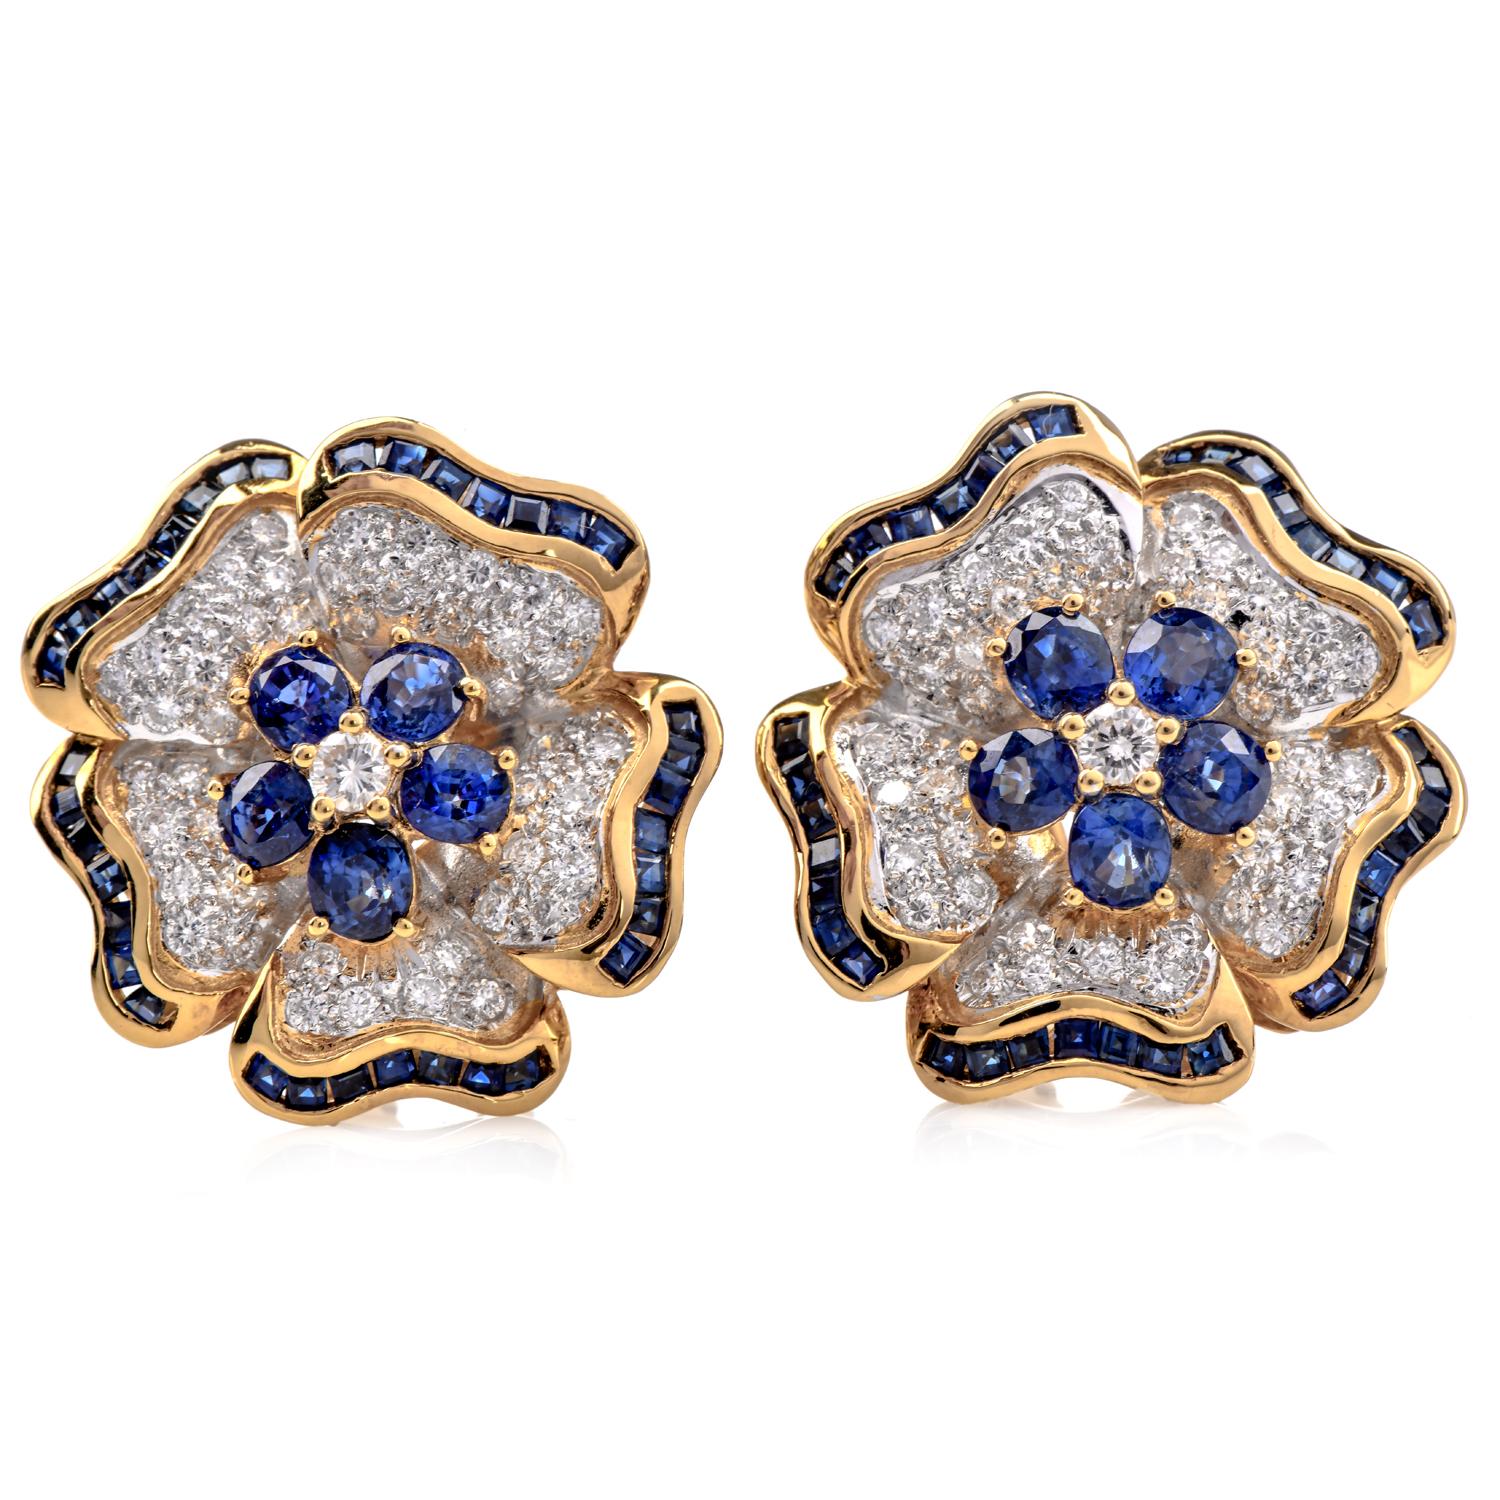 These exquisite Pair of vintage 1980s earrings are adorned with a captivating flower motif. Crafted from solid 18K yellow gold. These Vintage earrings feature a halo of oval sapphires encircling a dazzling diamond center. The leaves of the flower